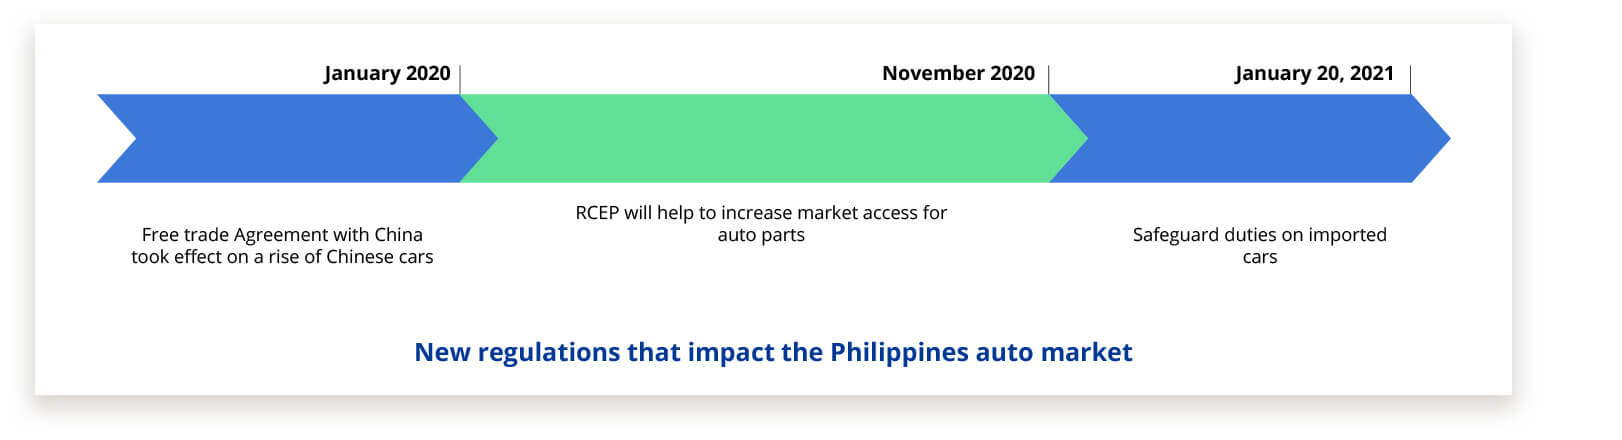 New regulations that impact the Philippines auto market